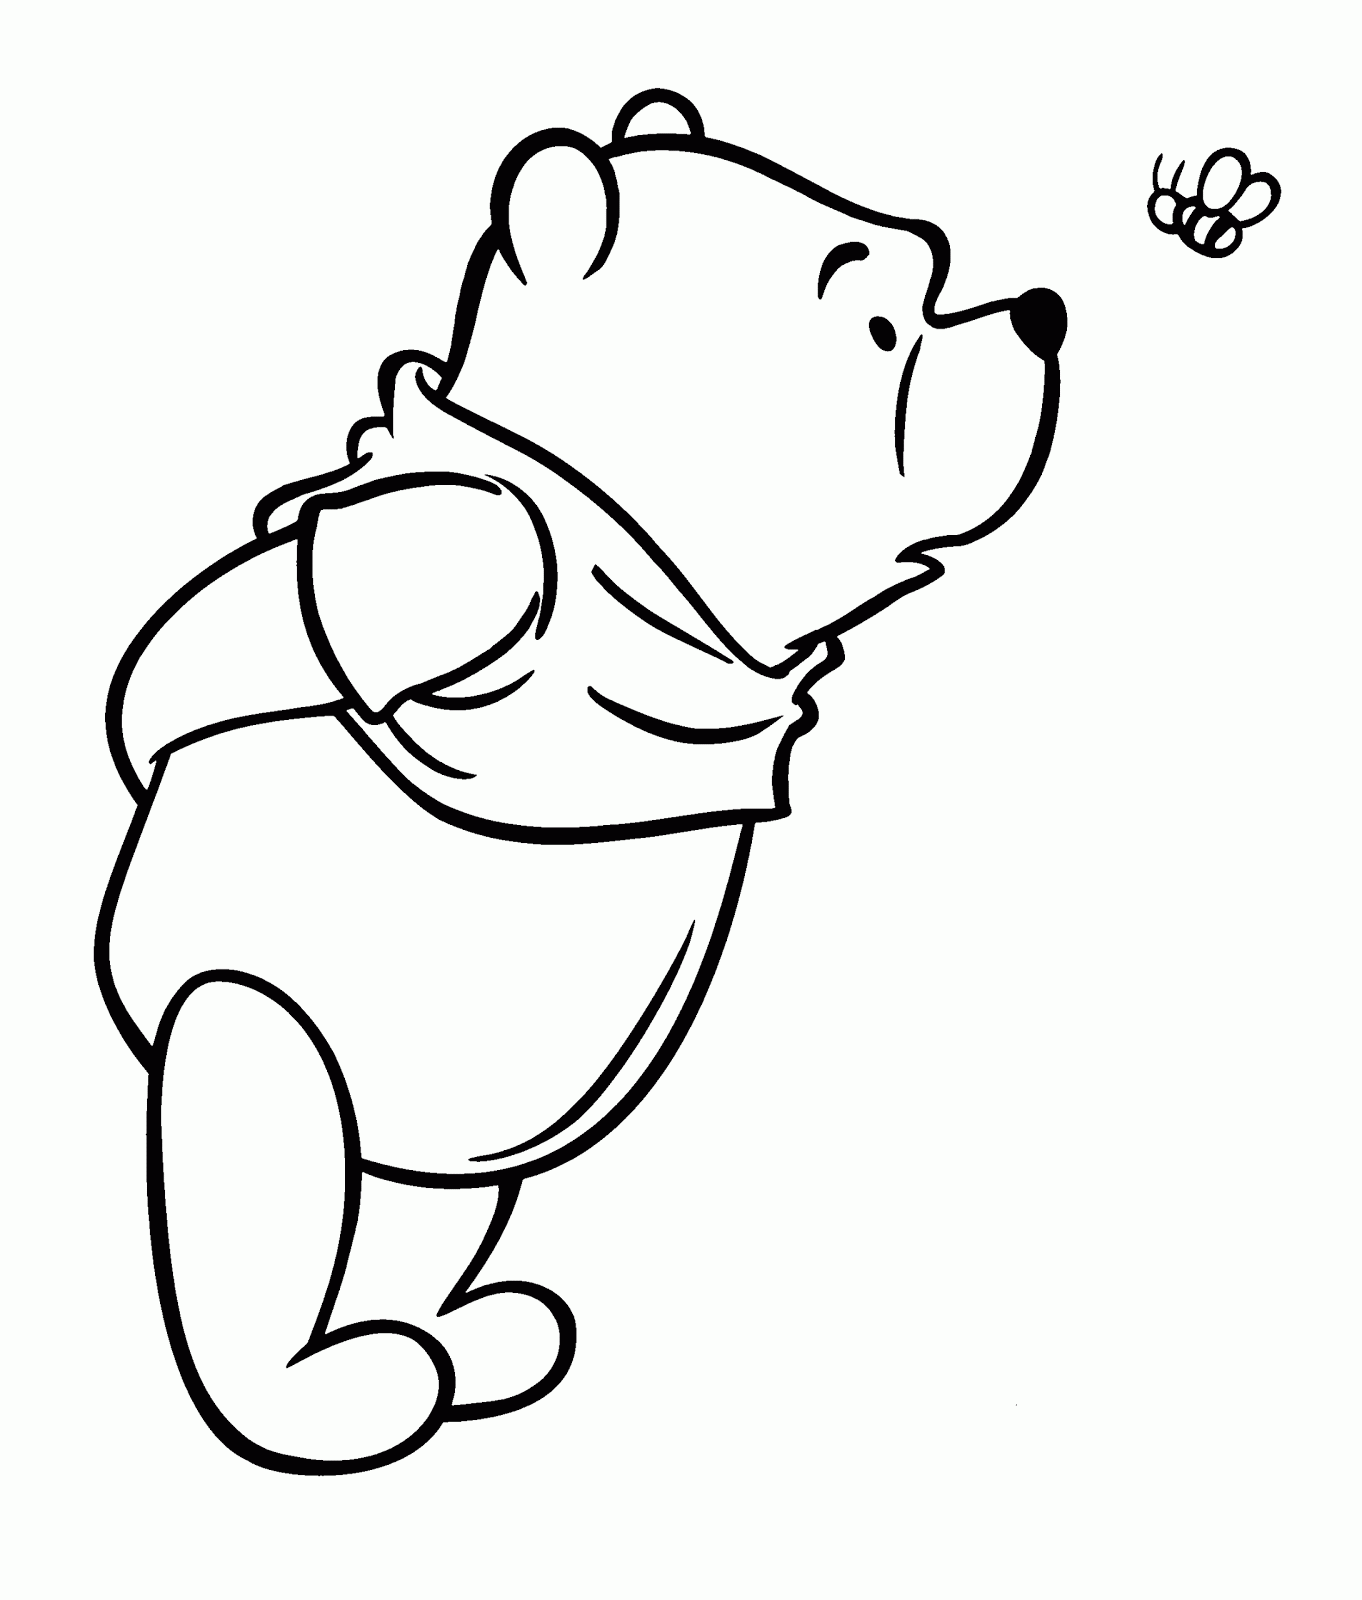 Pooh Sees a Bee Coloring Page